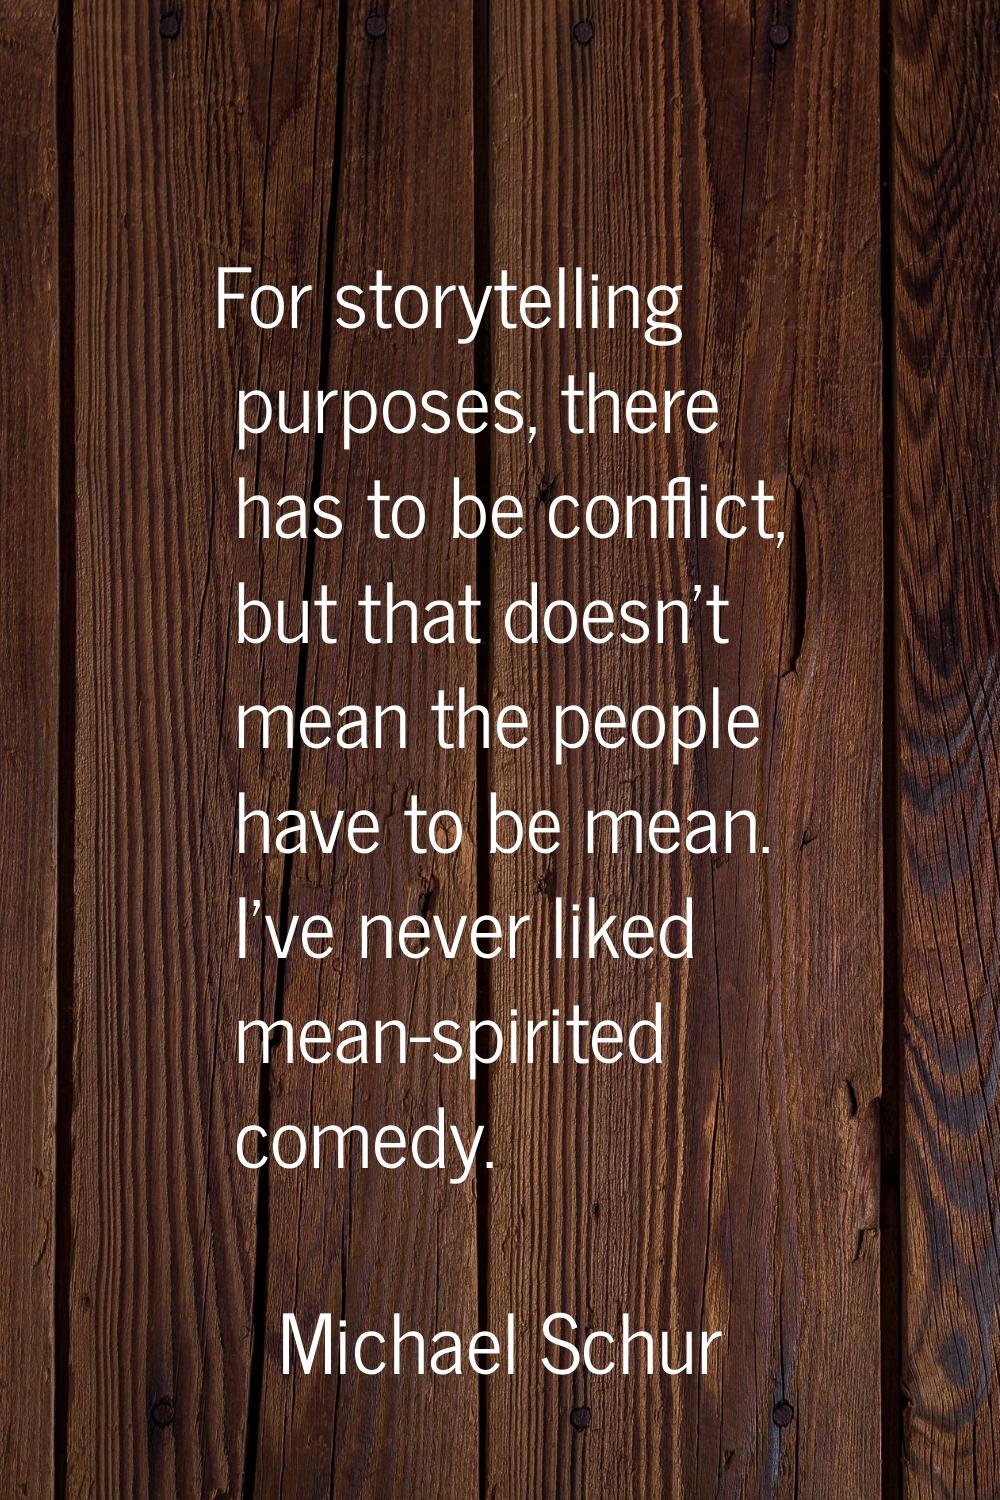 For storytelling purposes, there has to be conflict, but that doesn't mean the people have to be me